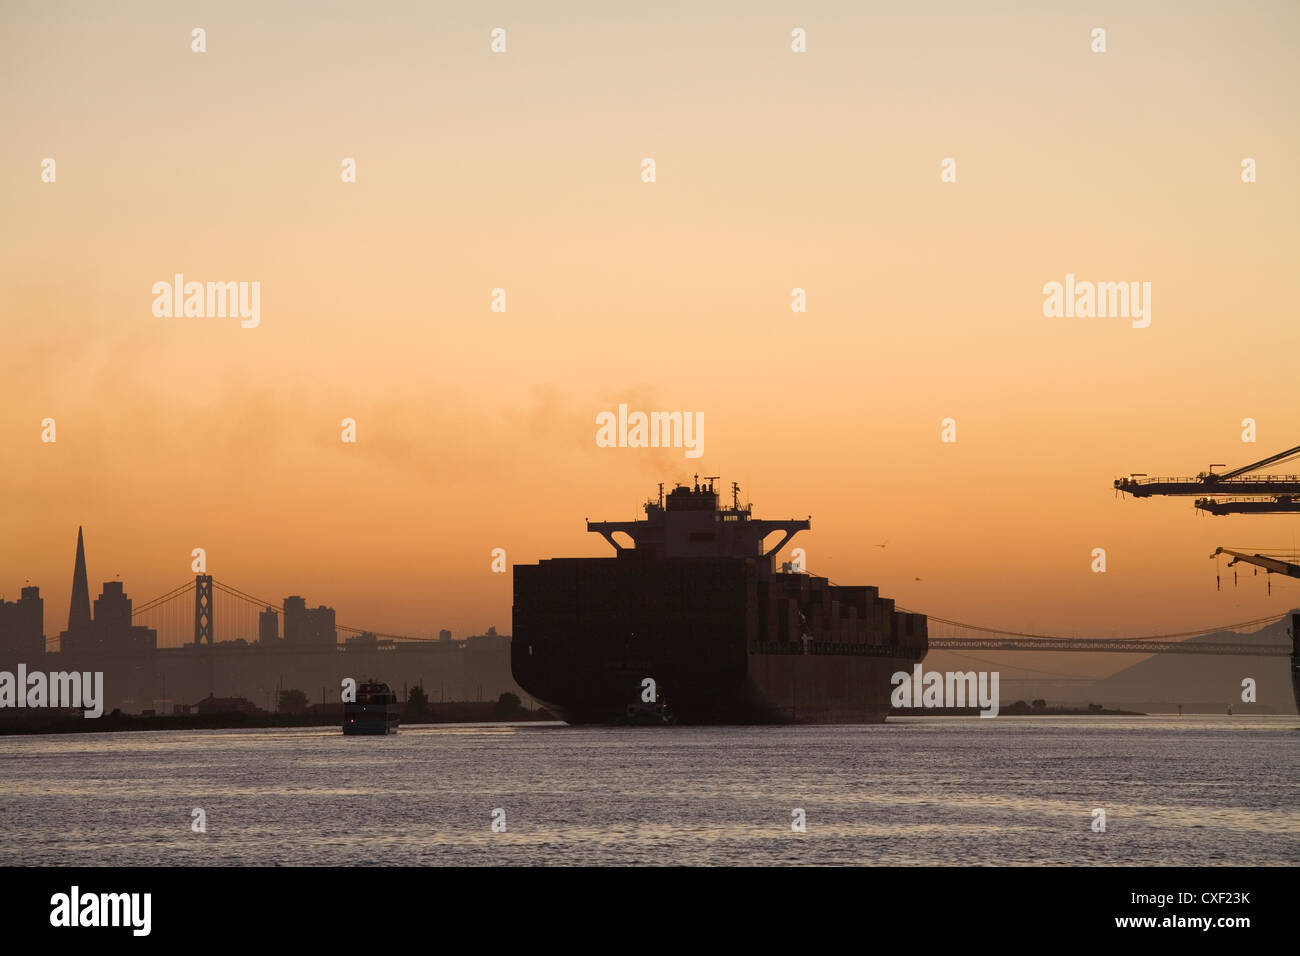 Tugboat and container ship in port of Oakland Stock Photo